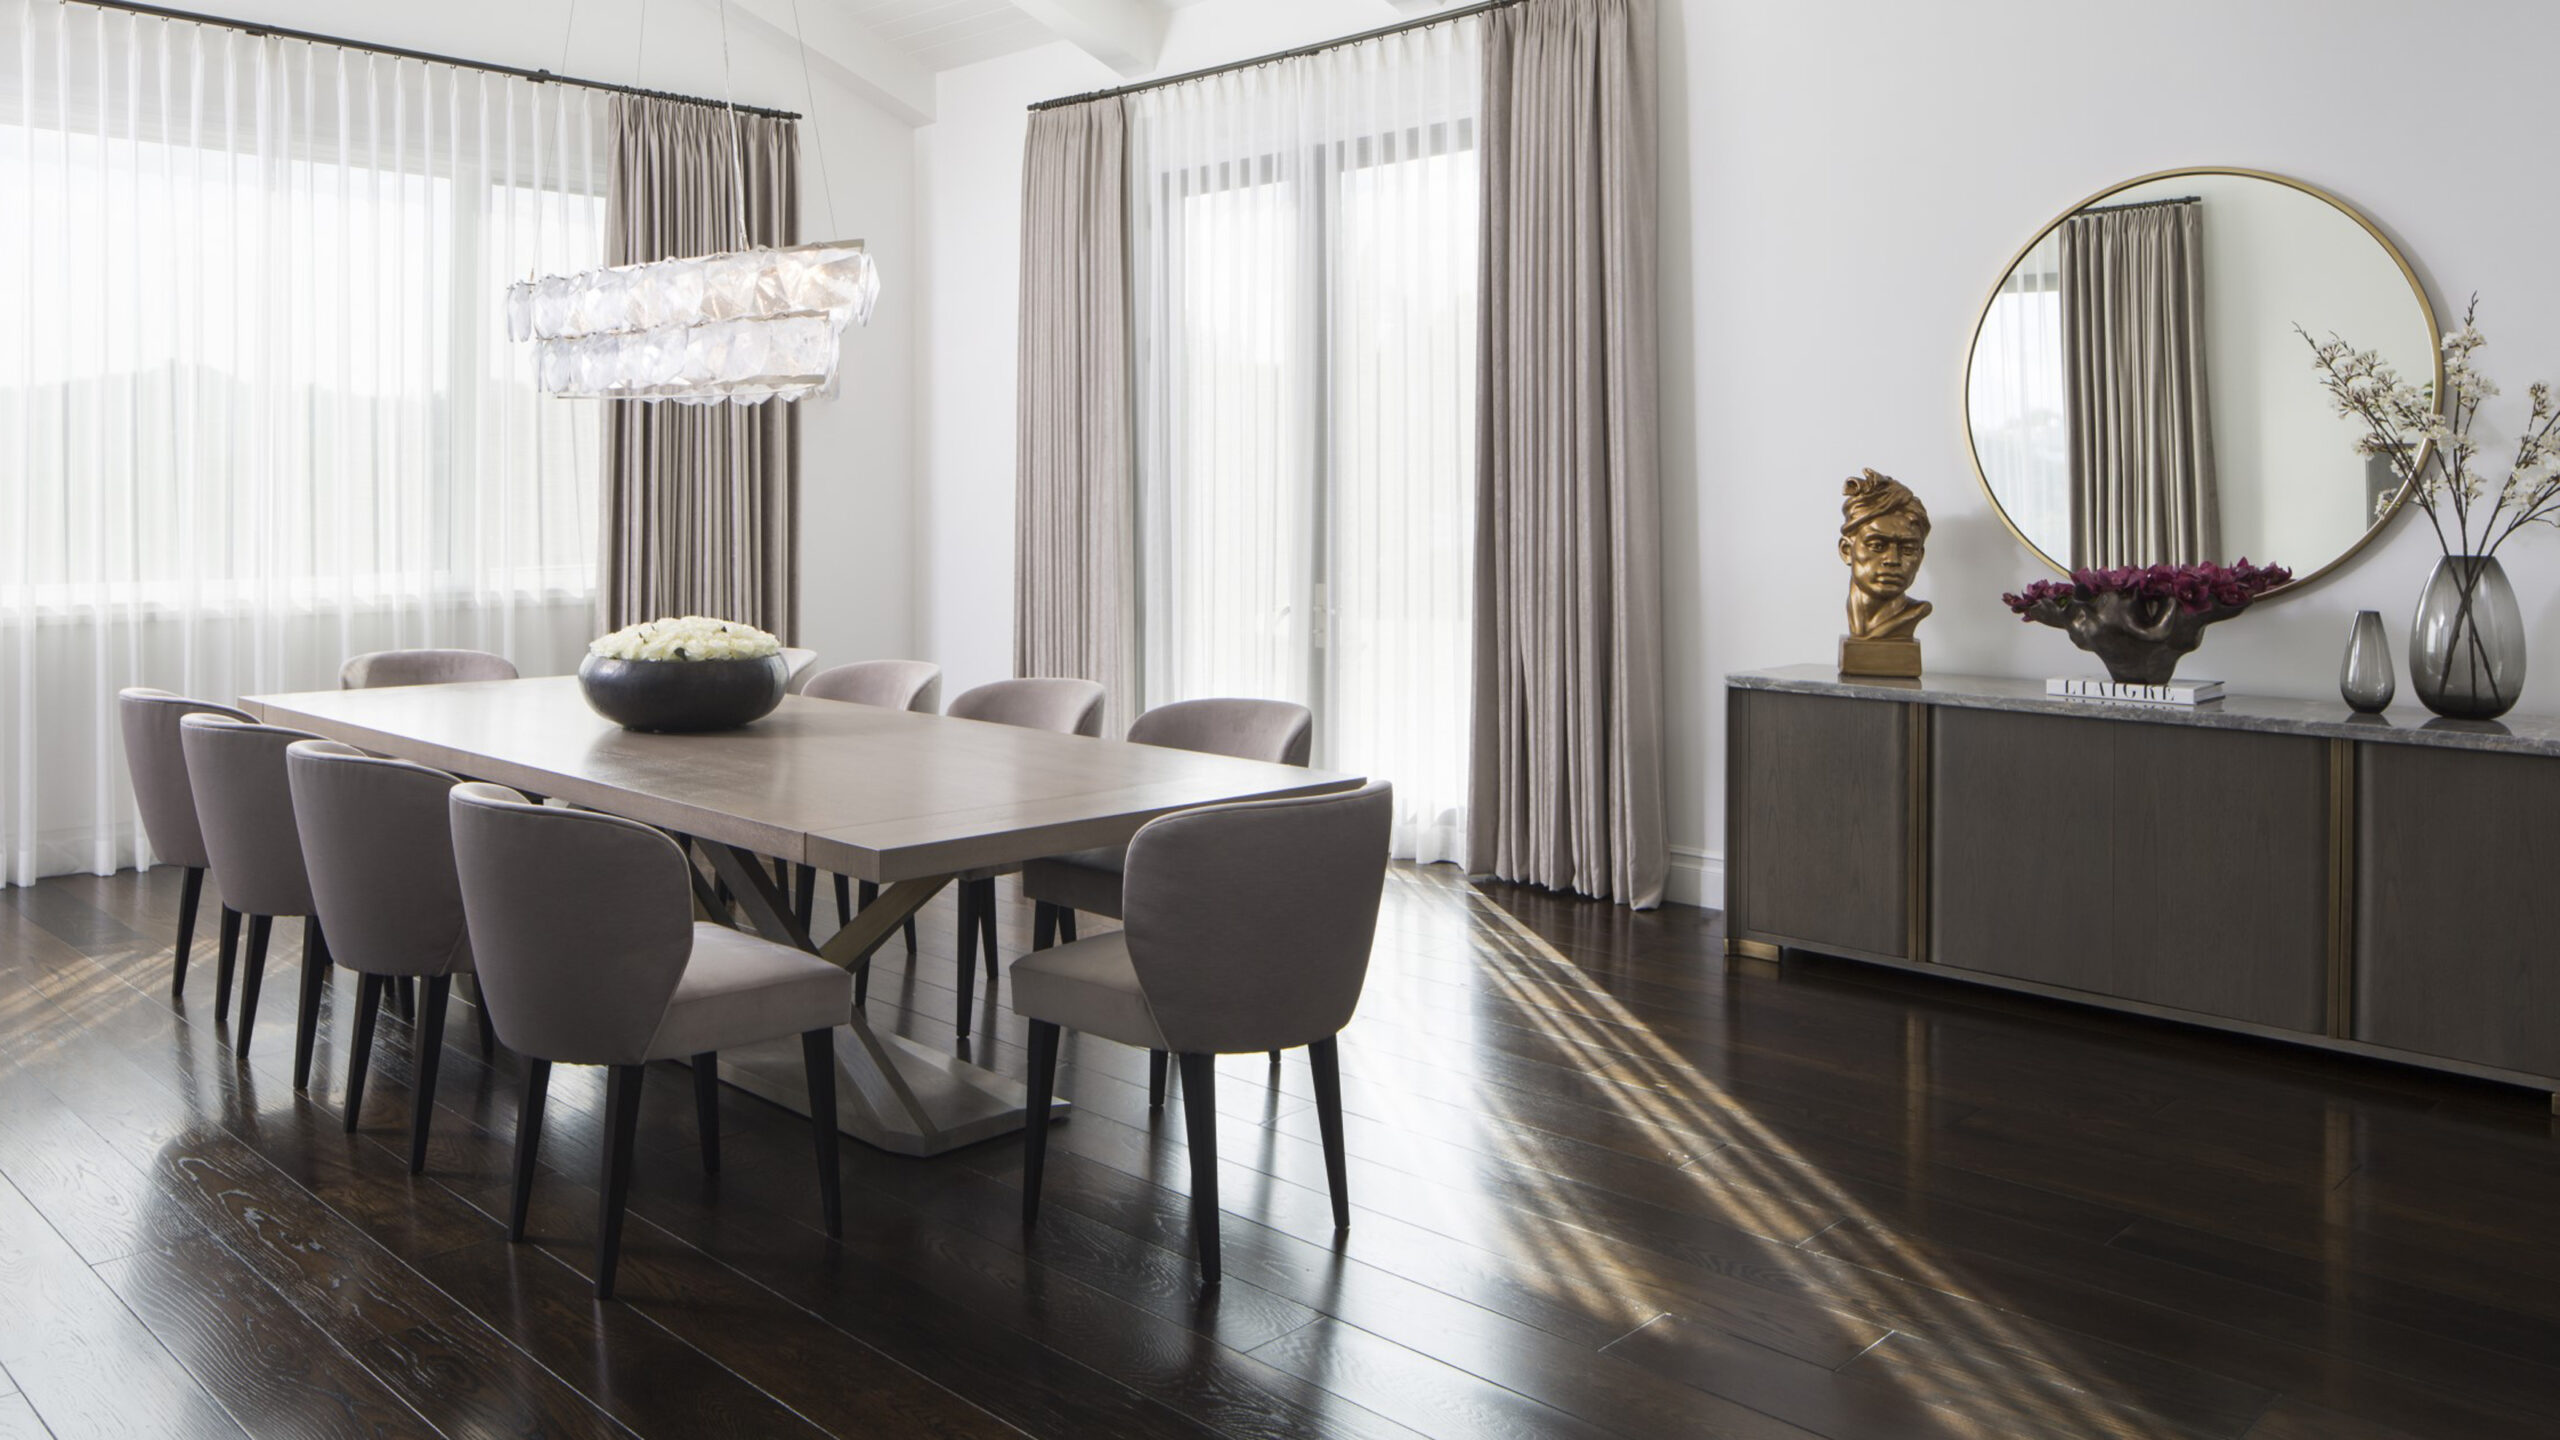 Decorating a Dining Room with Modern Dining Sets